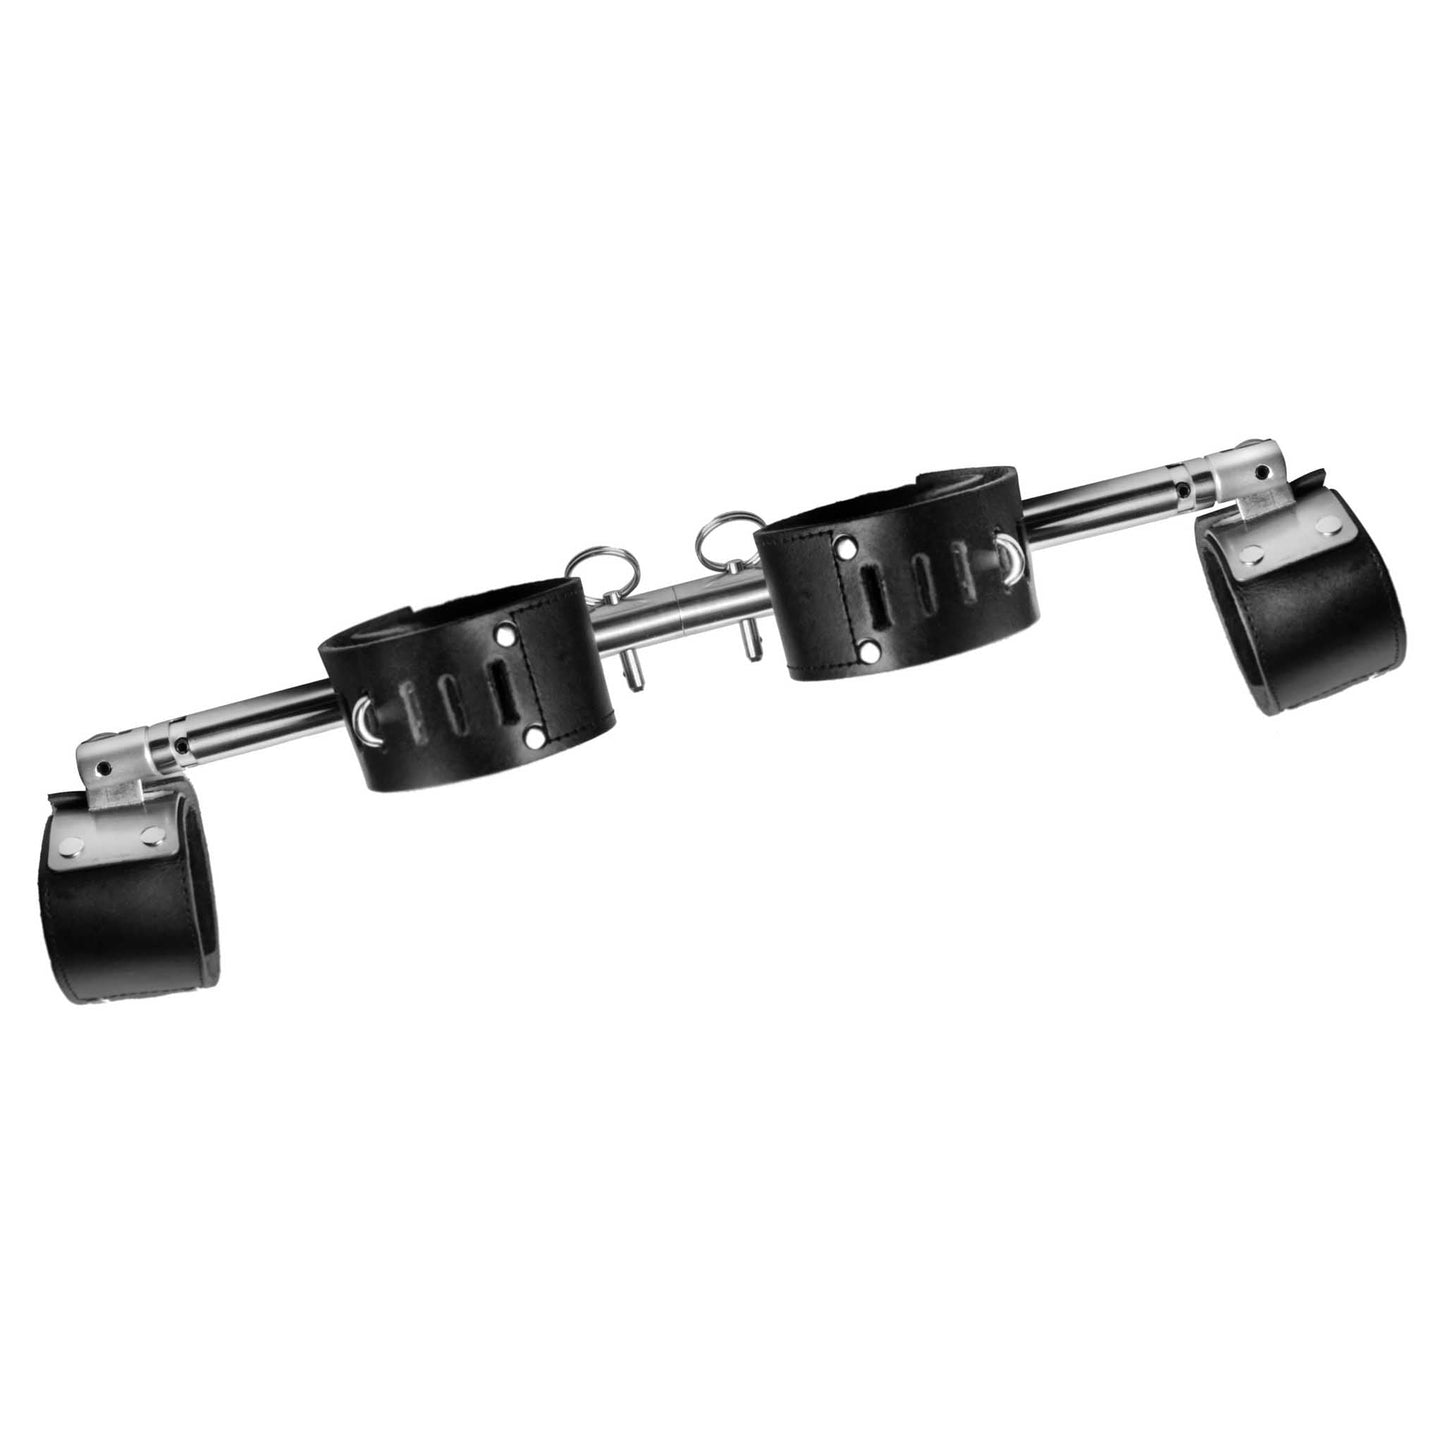 Strict Leather Adjustable Swiveling Spreader Bar with Leather Cuffs - Silver/Black